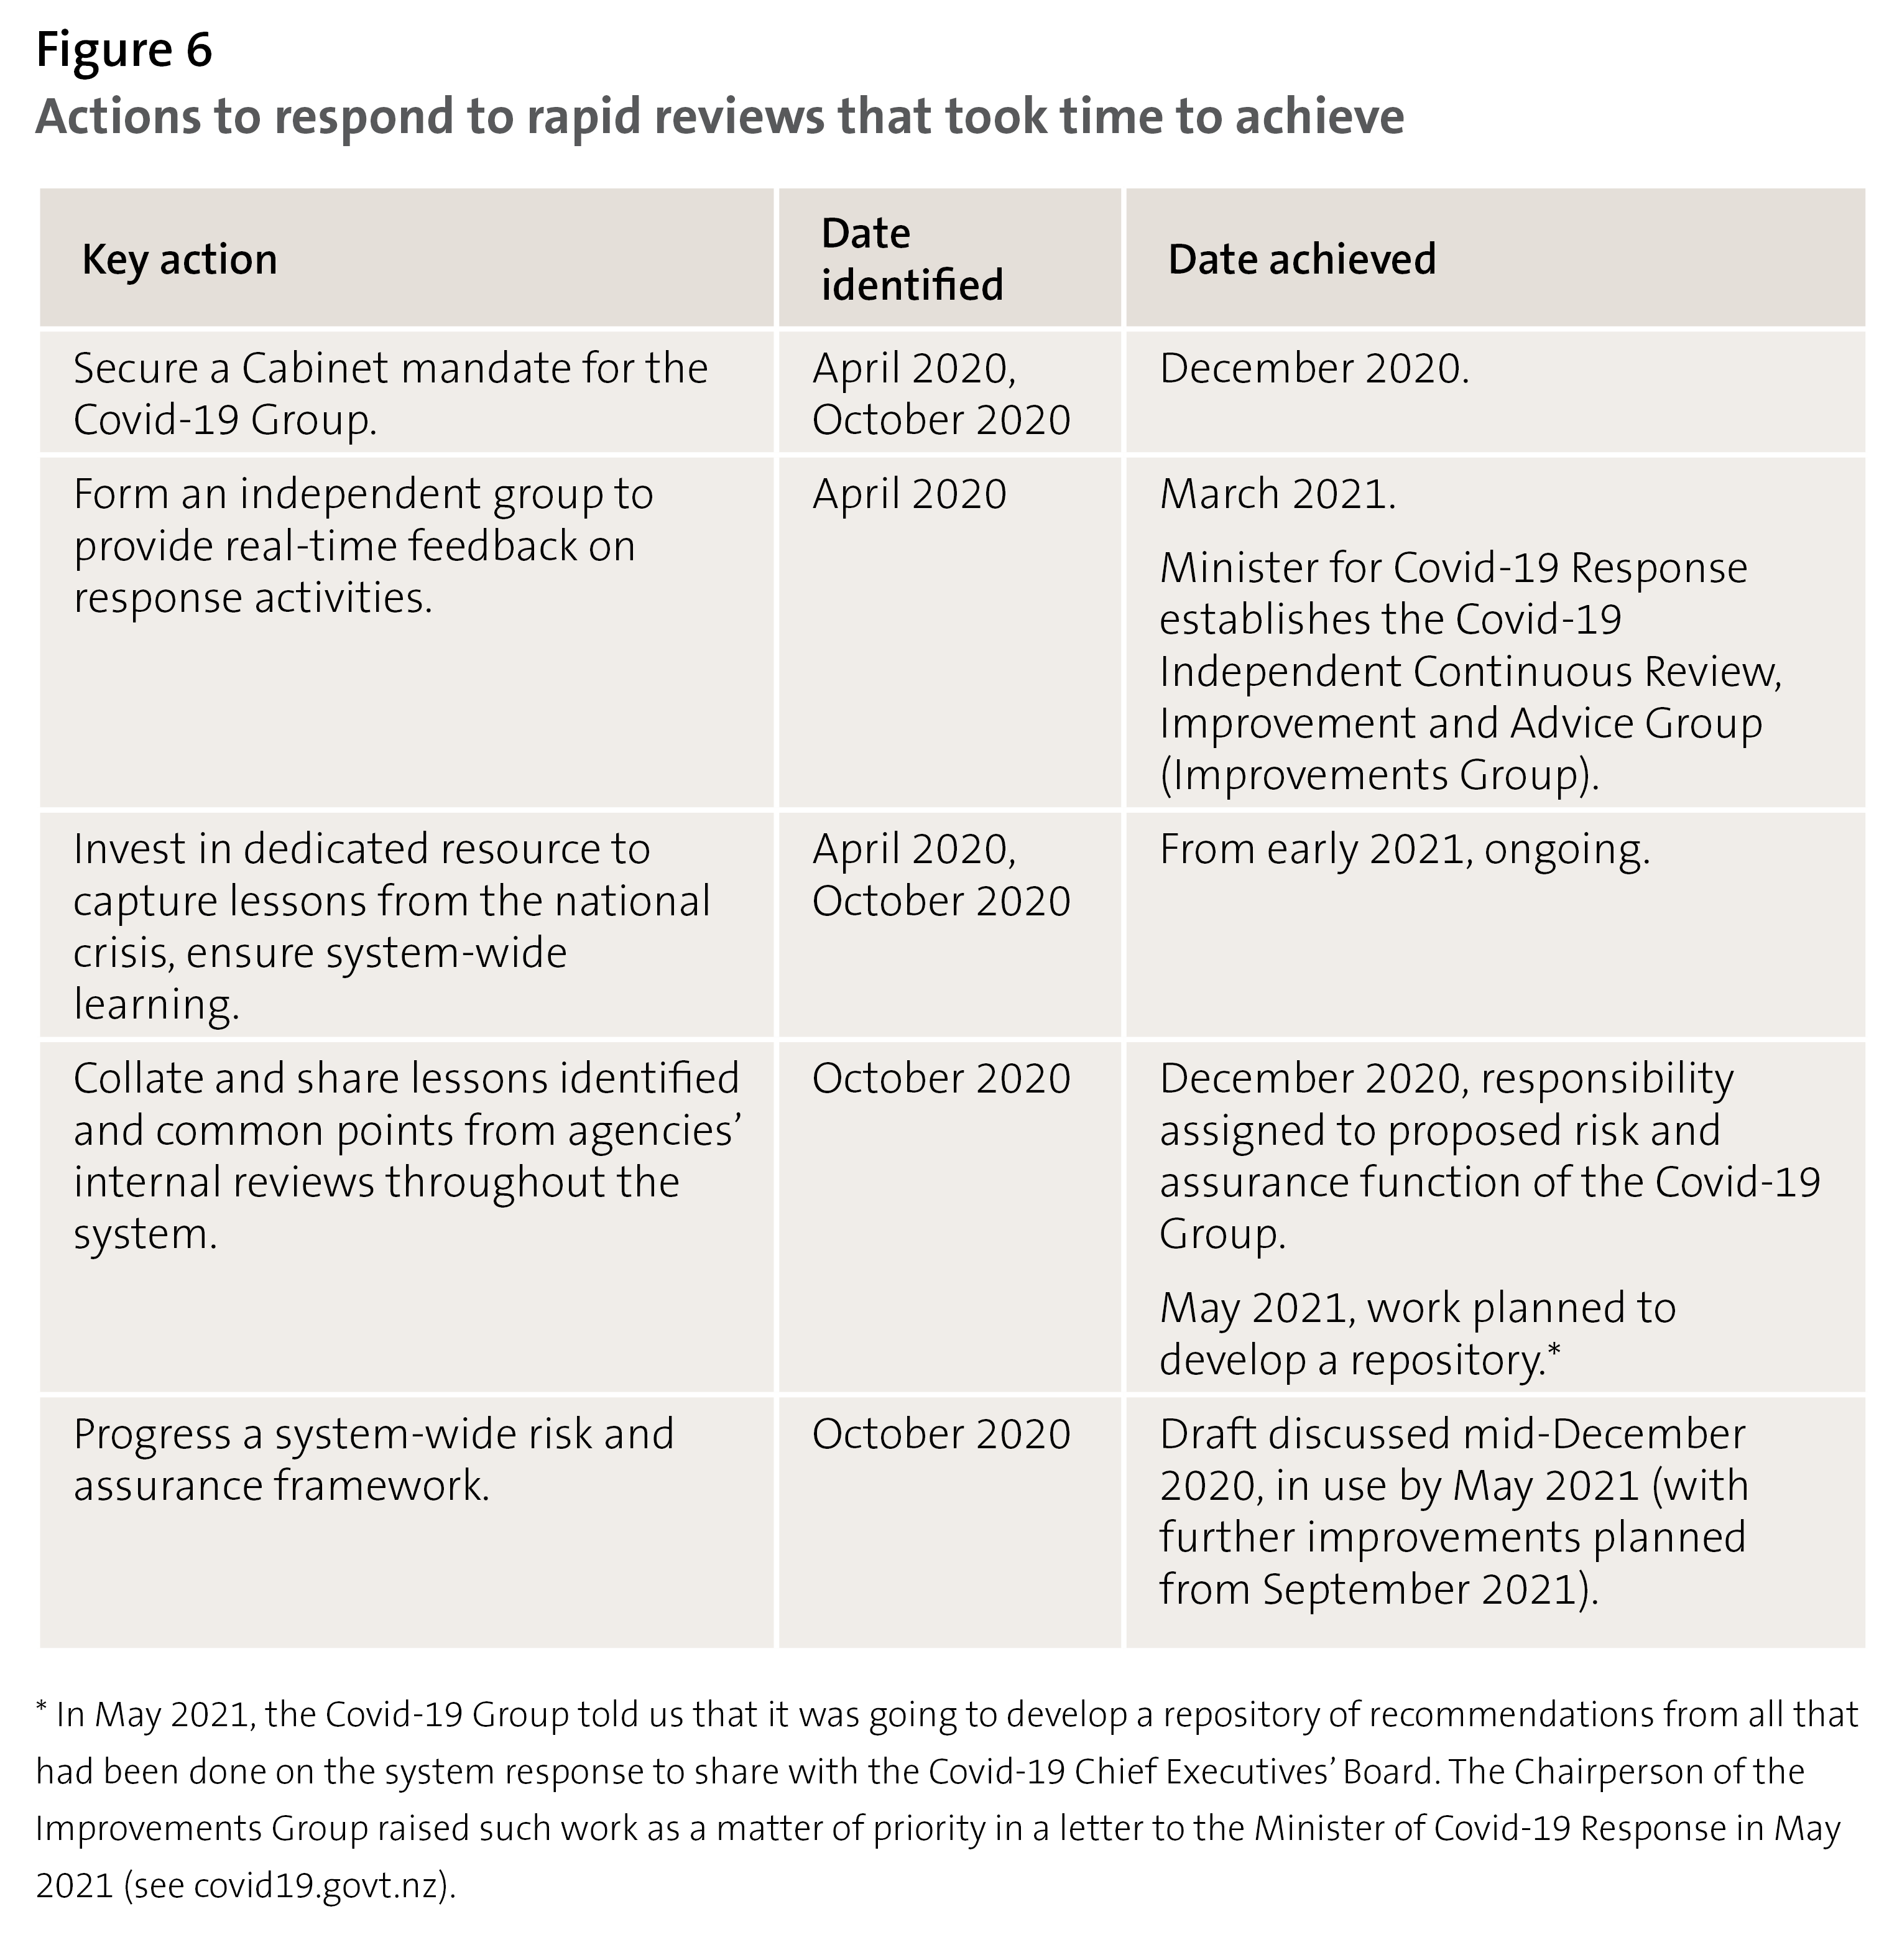 Figure 6: Actions to respond to rapid reviews that took time to achieve